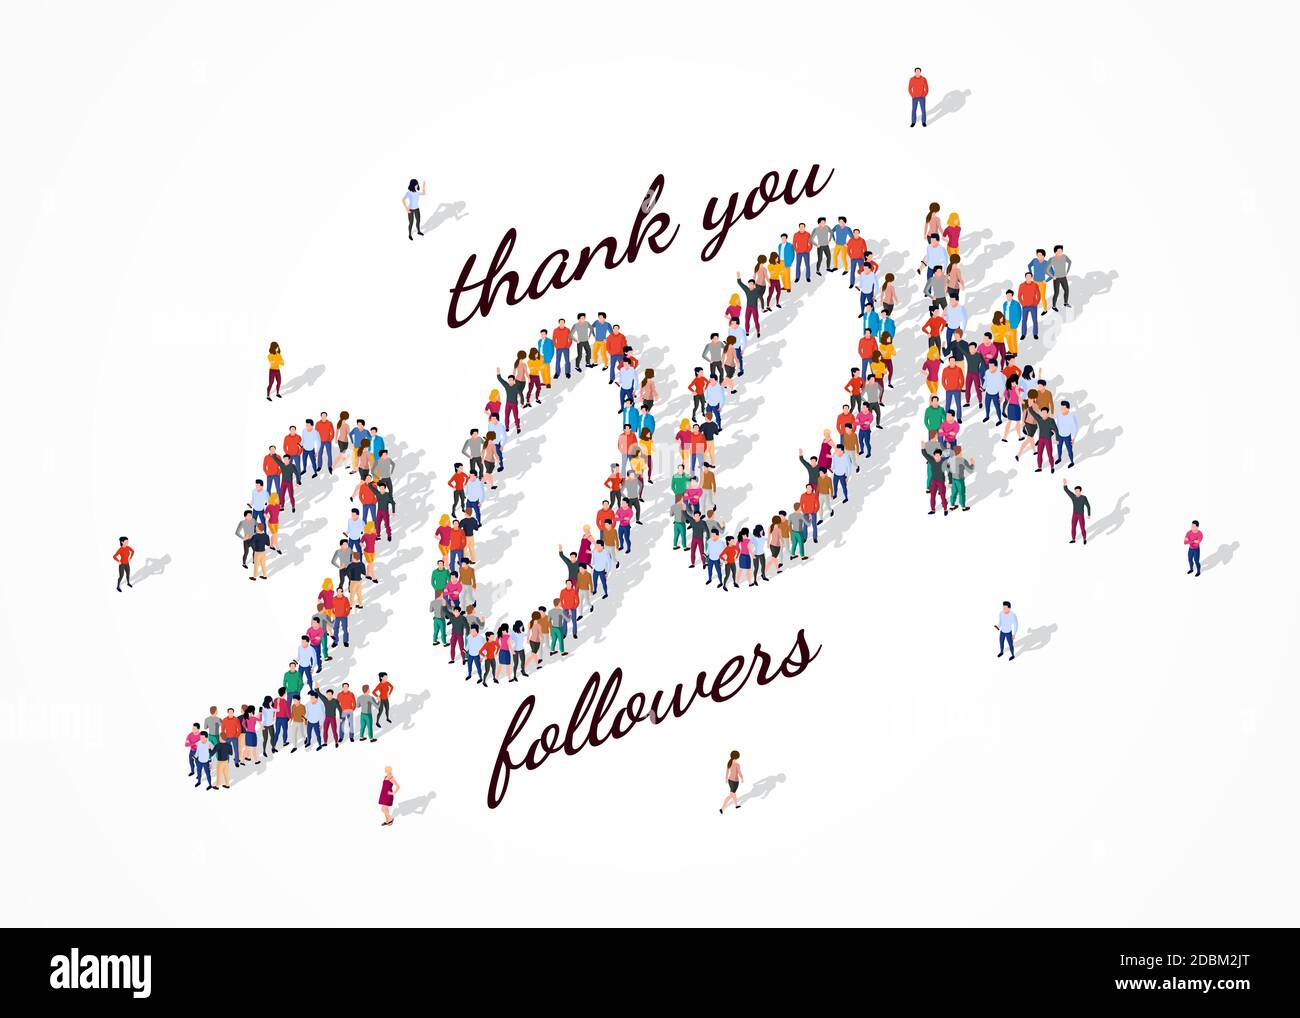 200K Followers. Group of business people are gathered together in the shape of 200000 word, for web page, banner, presentation, social media, Crowd of little people. Teamwork. Stock Vector